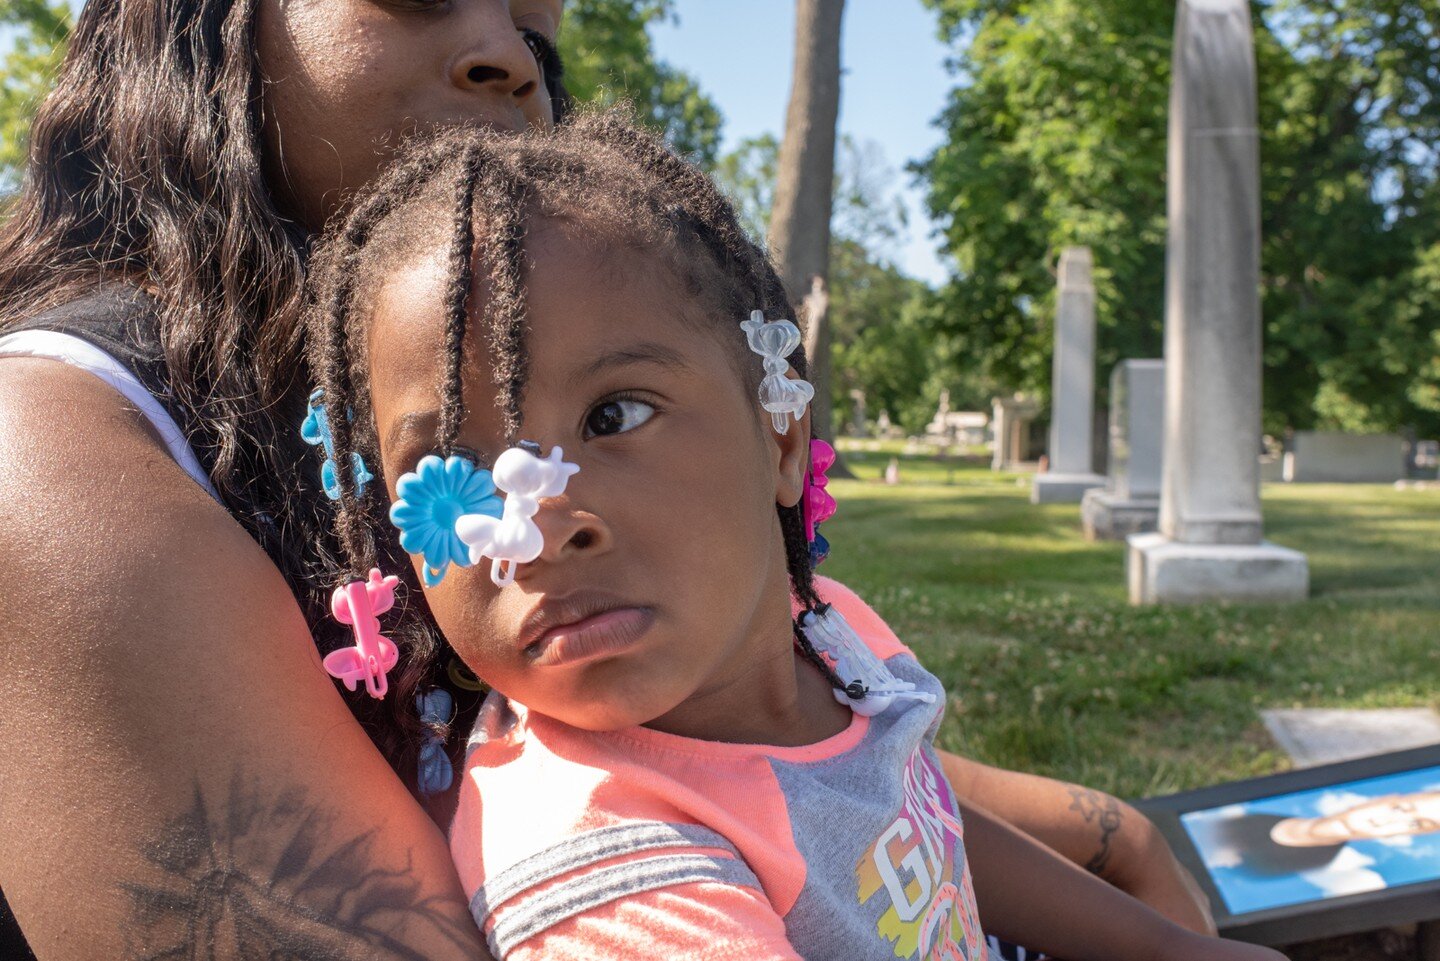 Kids learn about #gunviolence at far too young an age. These little girls - names withheld - visit the cemetary where brothers, cousins, uncles, and others are buried.

#gunviolence #texas #texasschoolshooting #schoolshootings #robbelementaryschool #